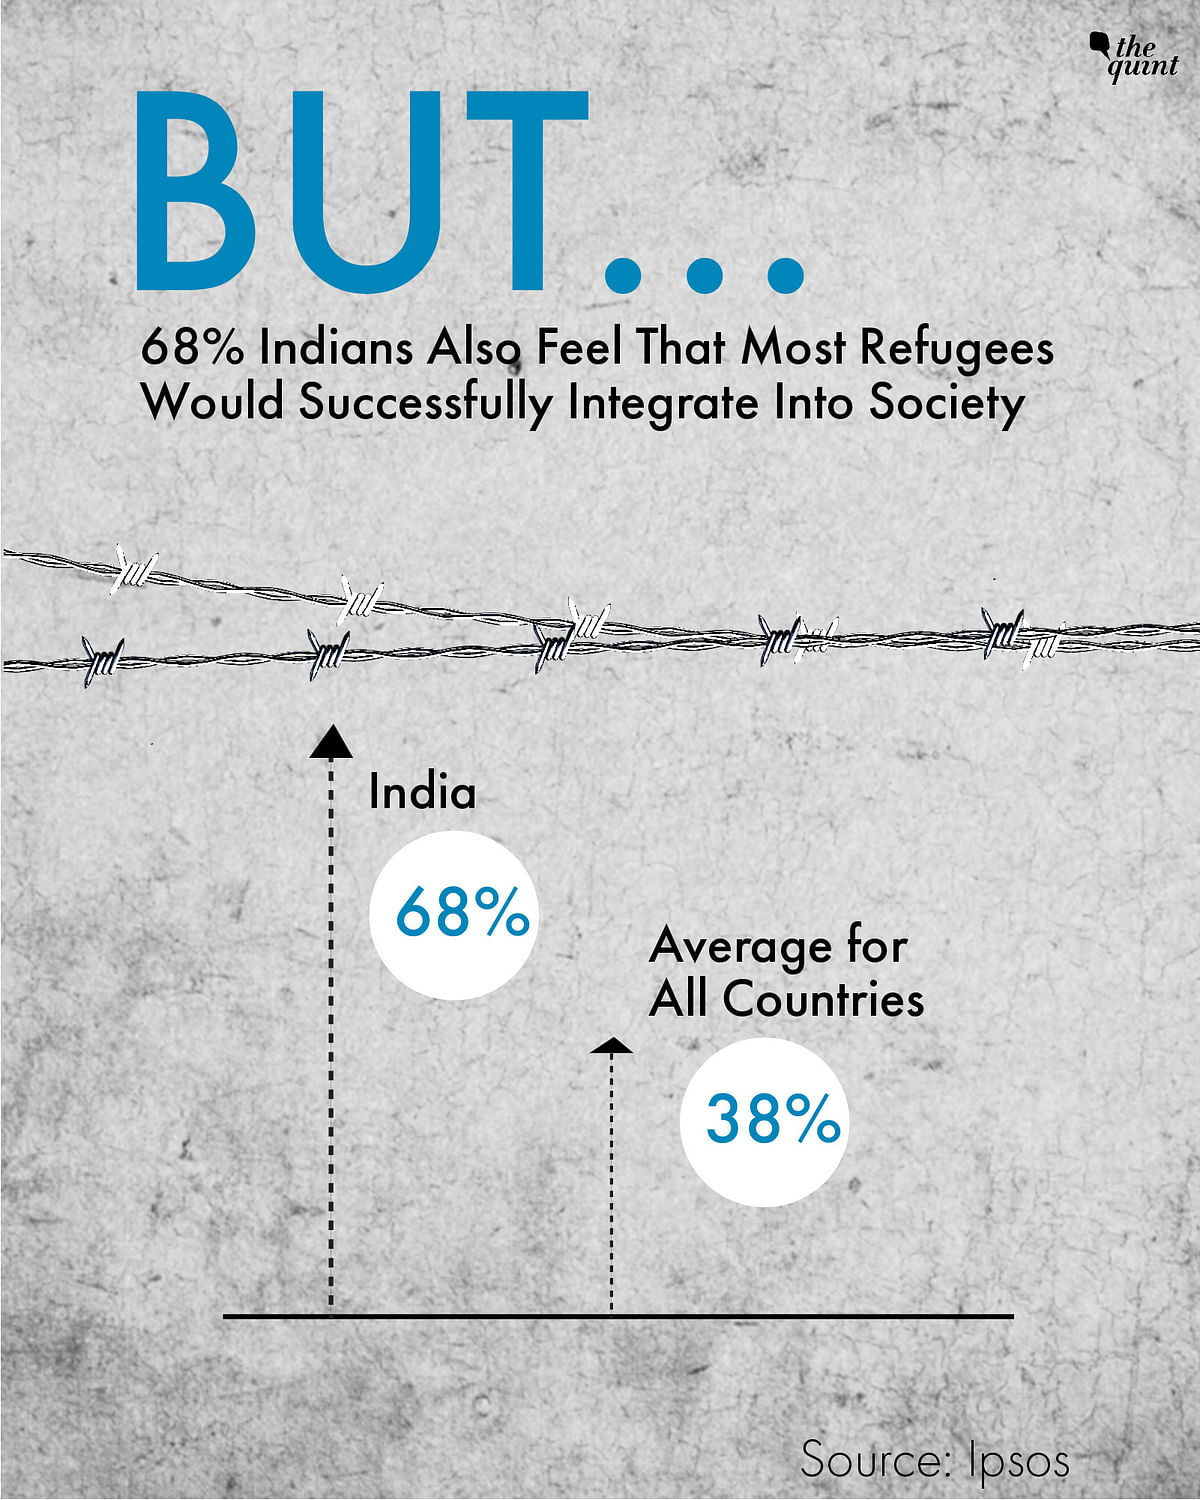 Research firm Ipsos has come out with a survey report on perception regarding refugees to mark World Refugee Day. 